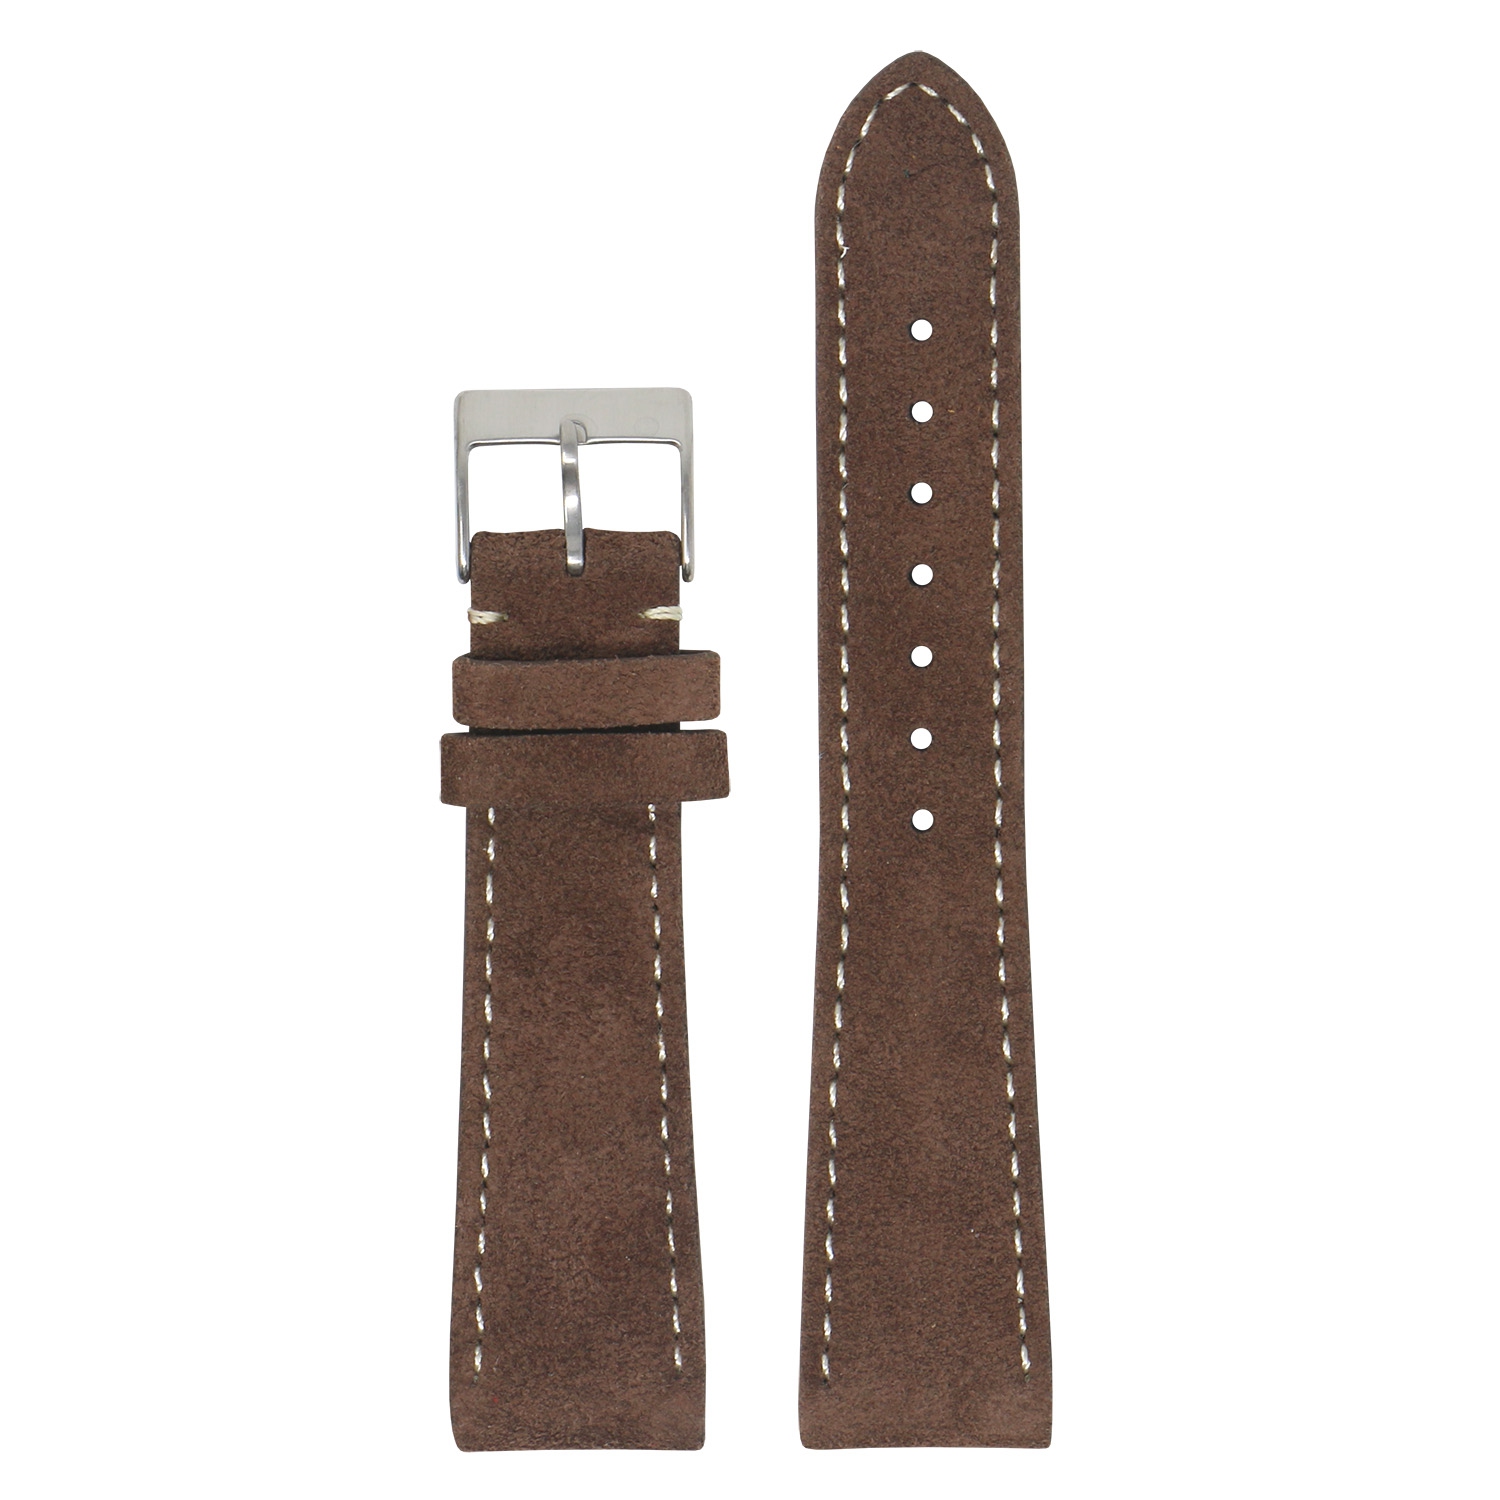 StrapsCo Classic Suede Watch Band Strap (Short, Standard, Long) for Fitbit Charge 4 & Charge 3 - Standard - Brown